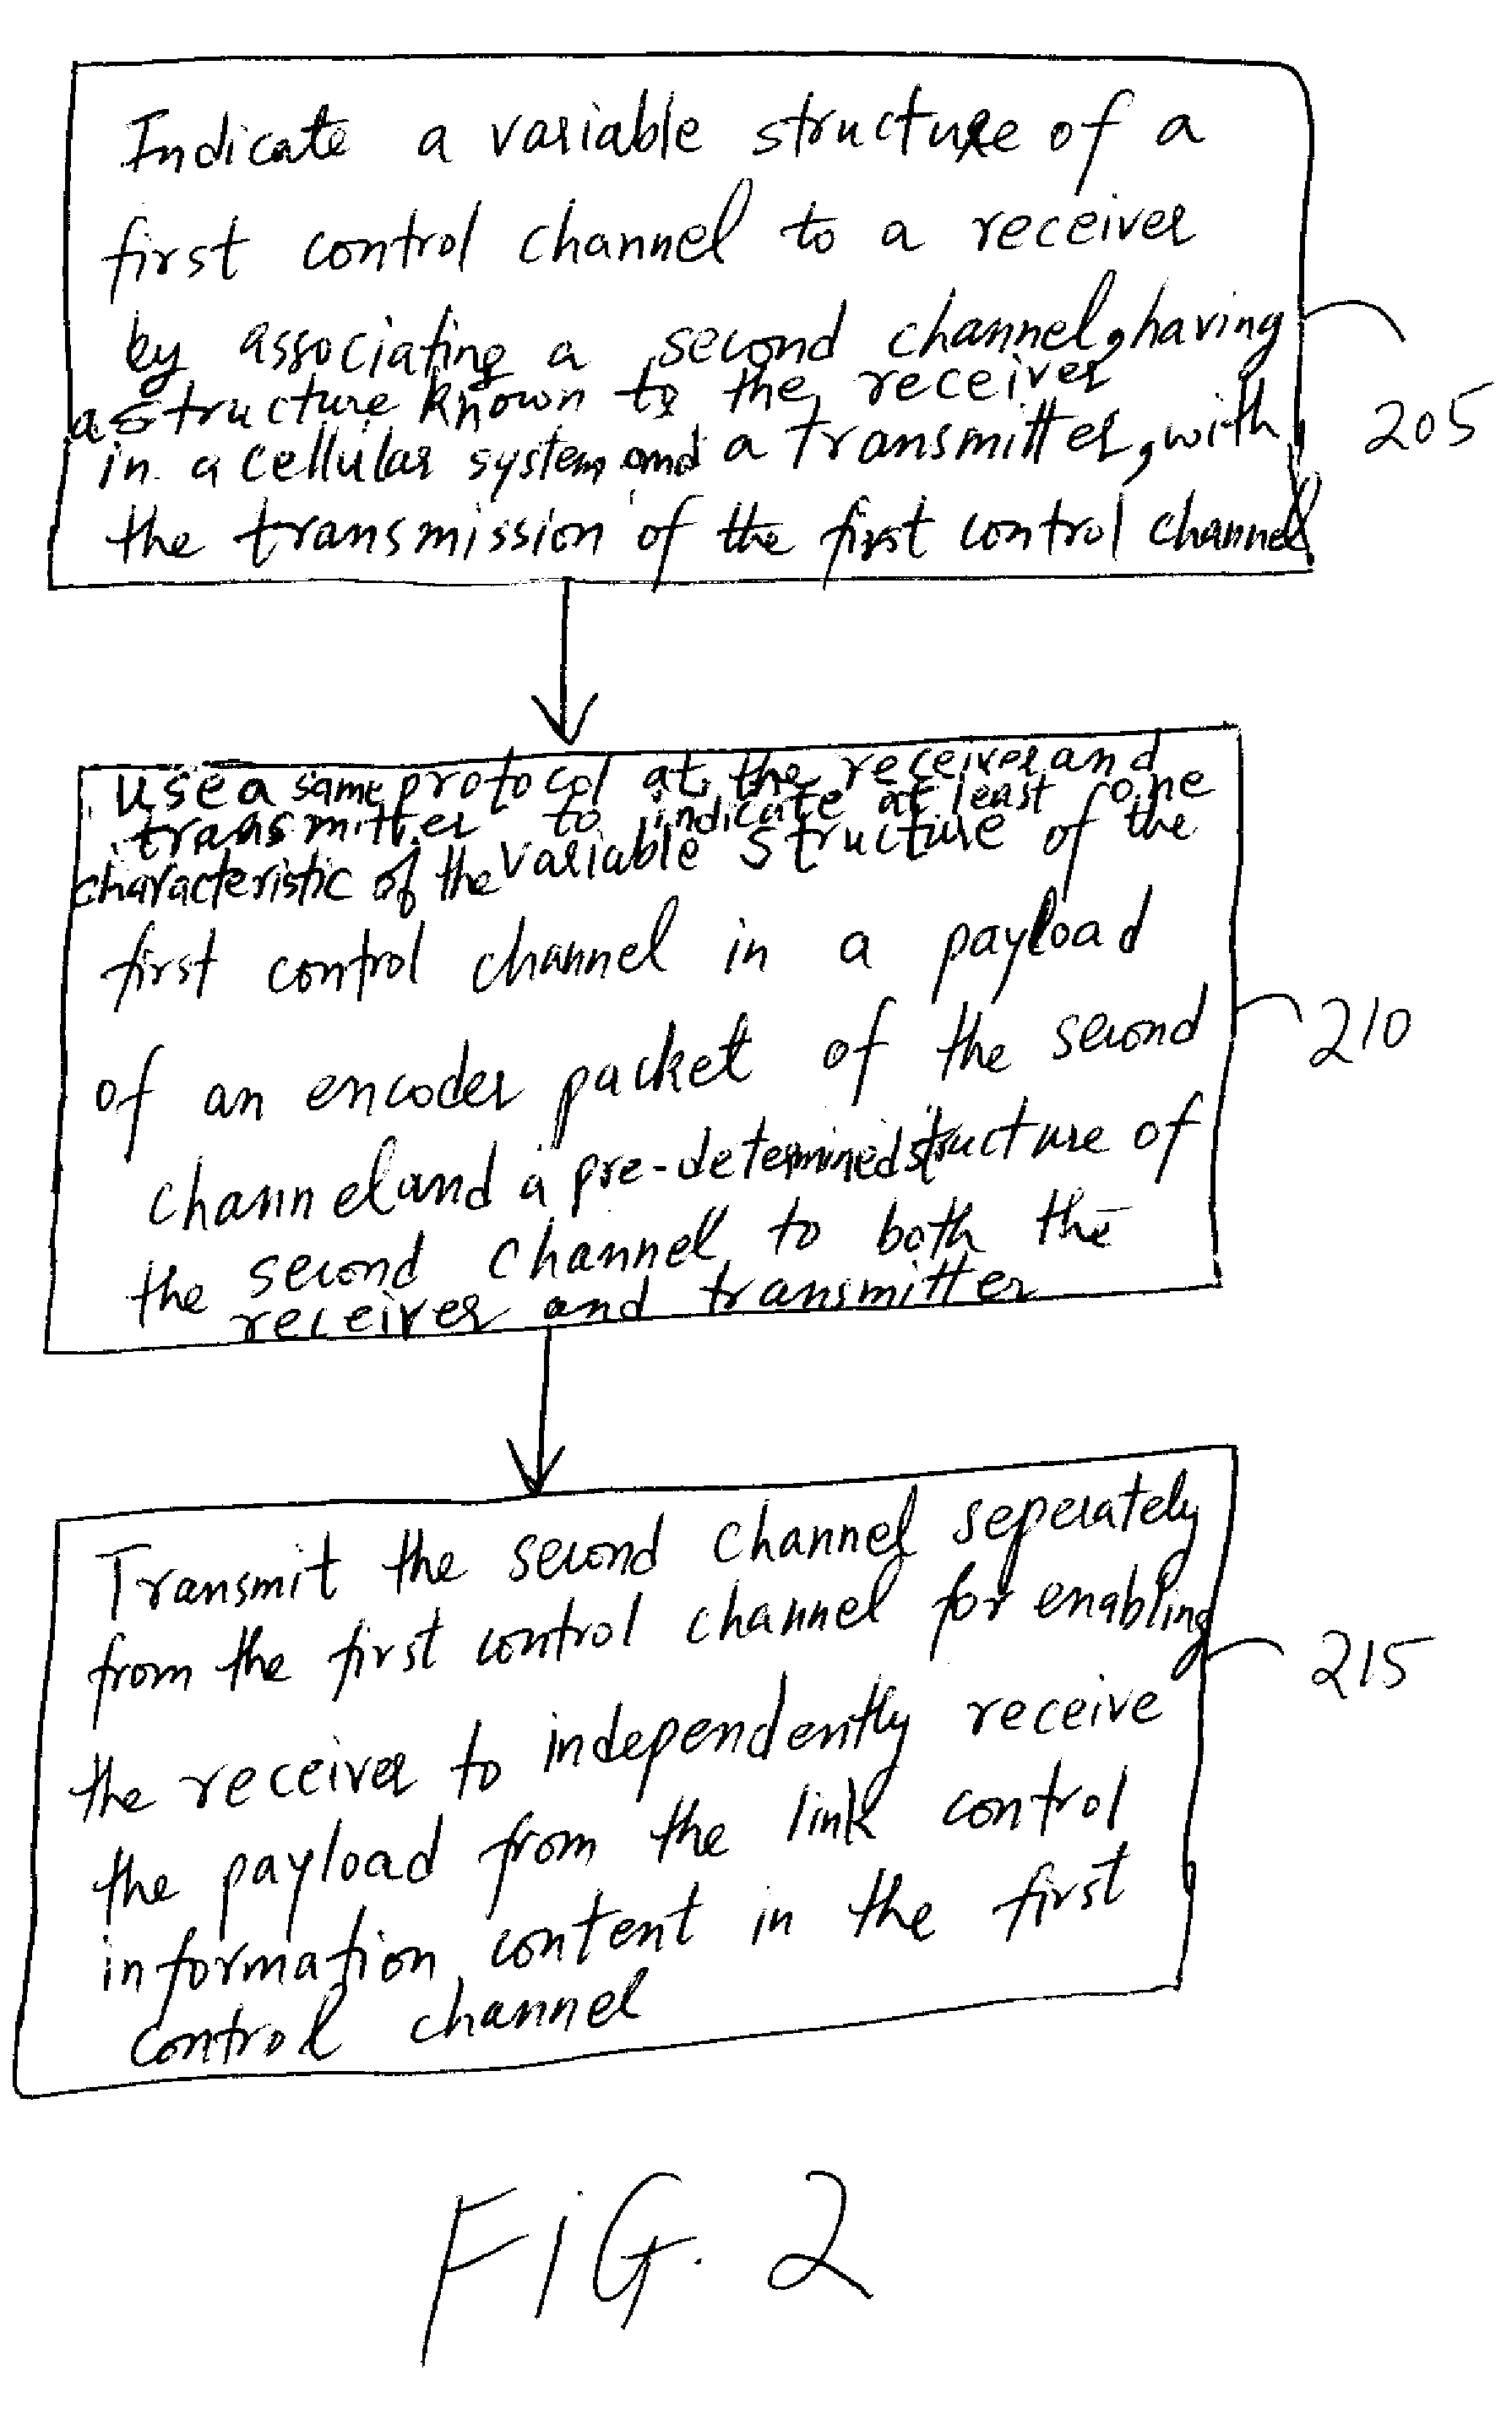 Indicating a variable control channel structure for transmissions in a cellular system